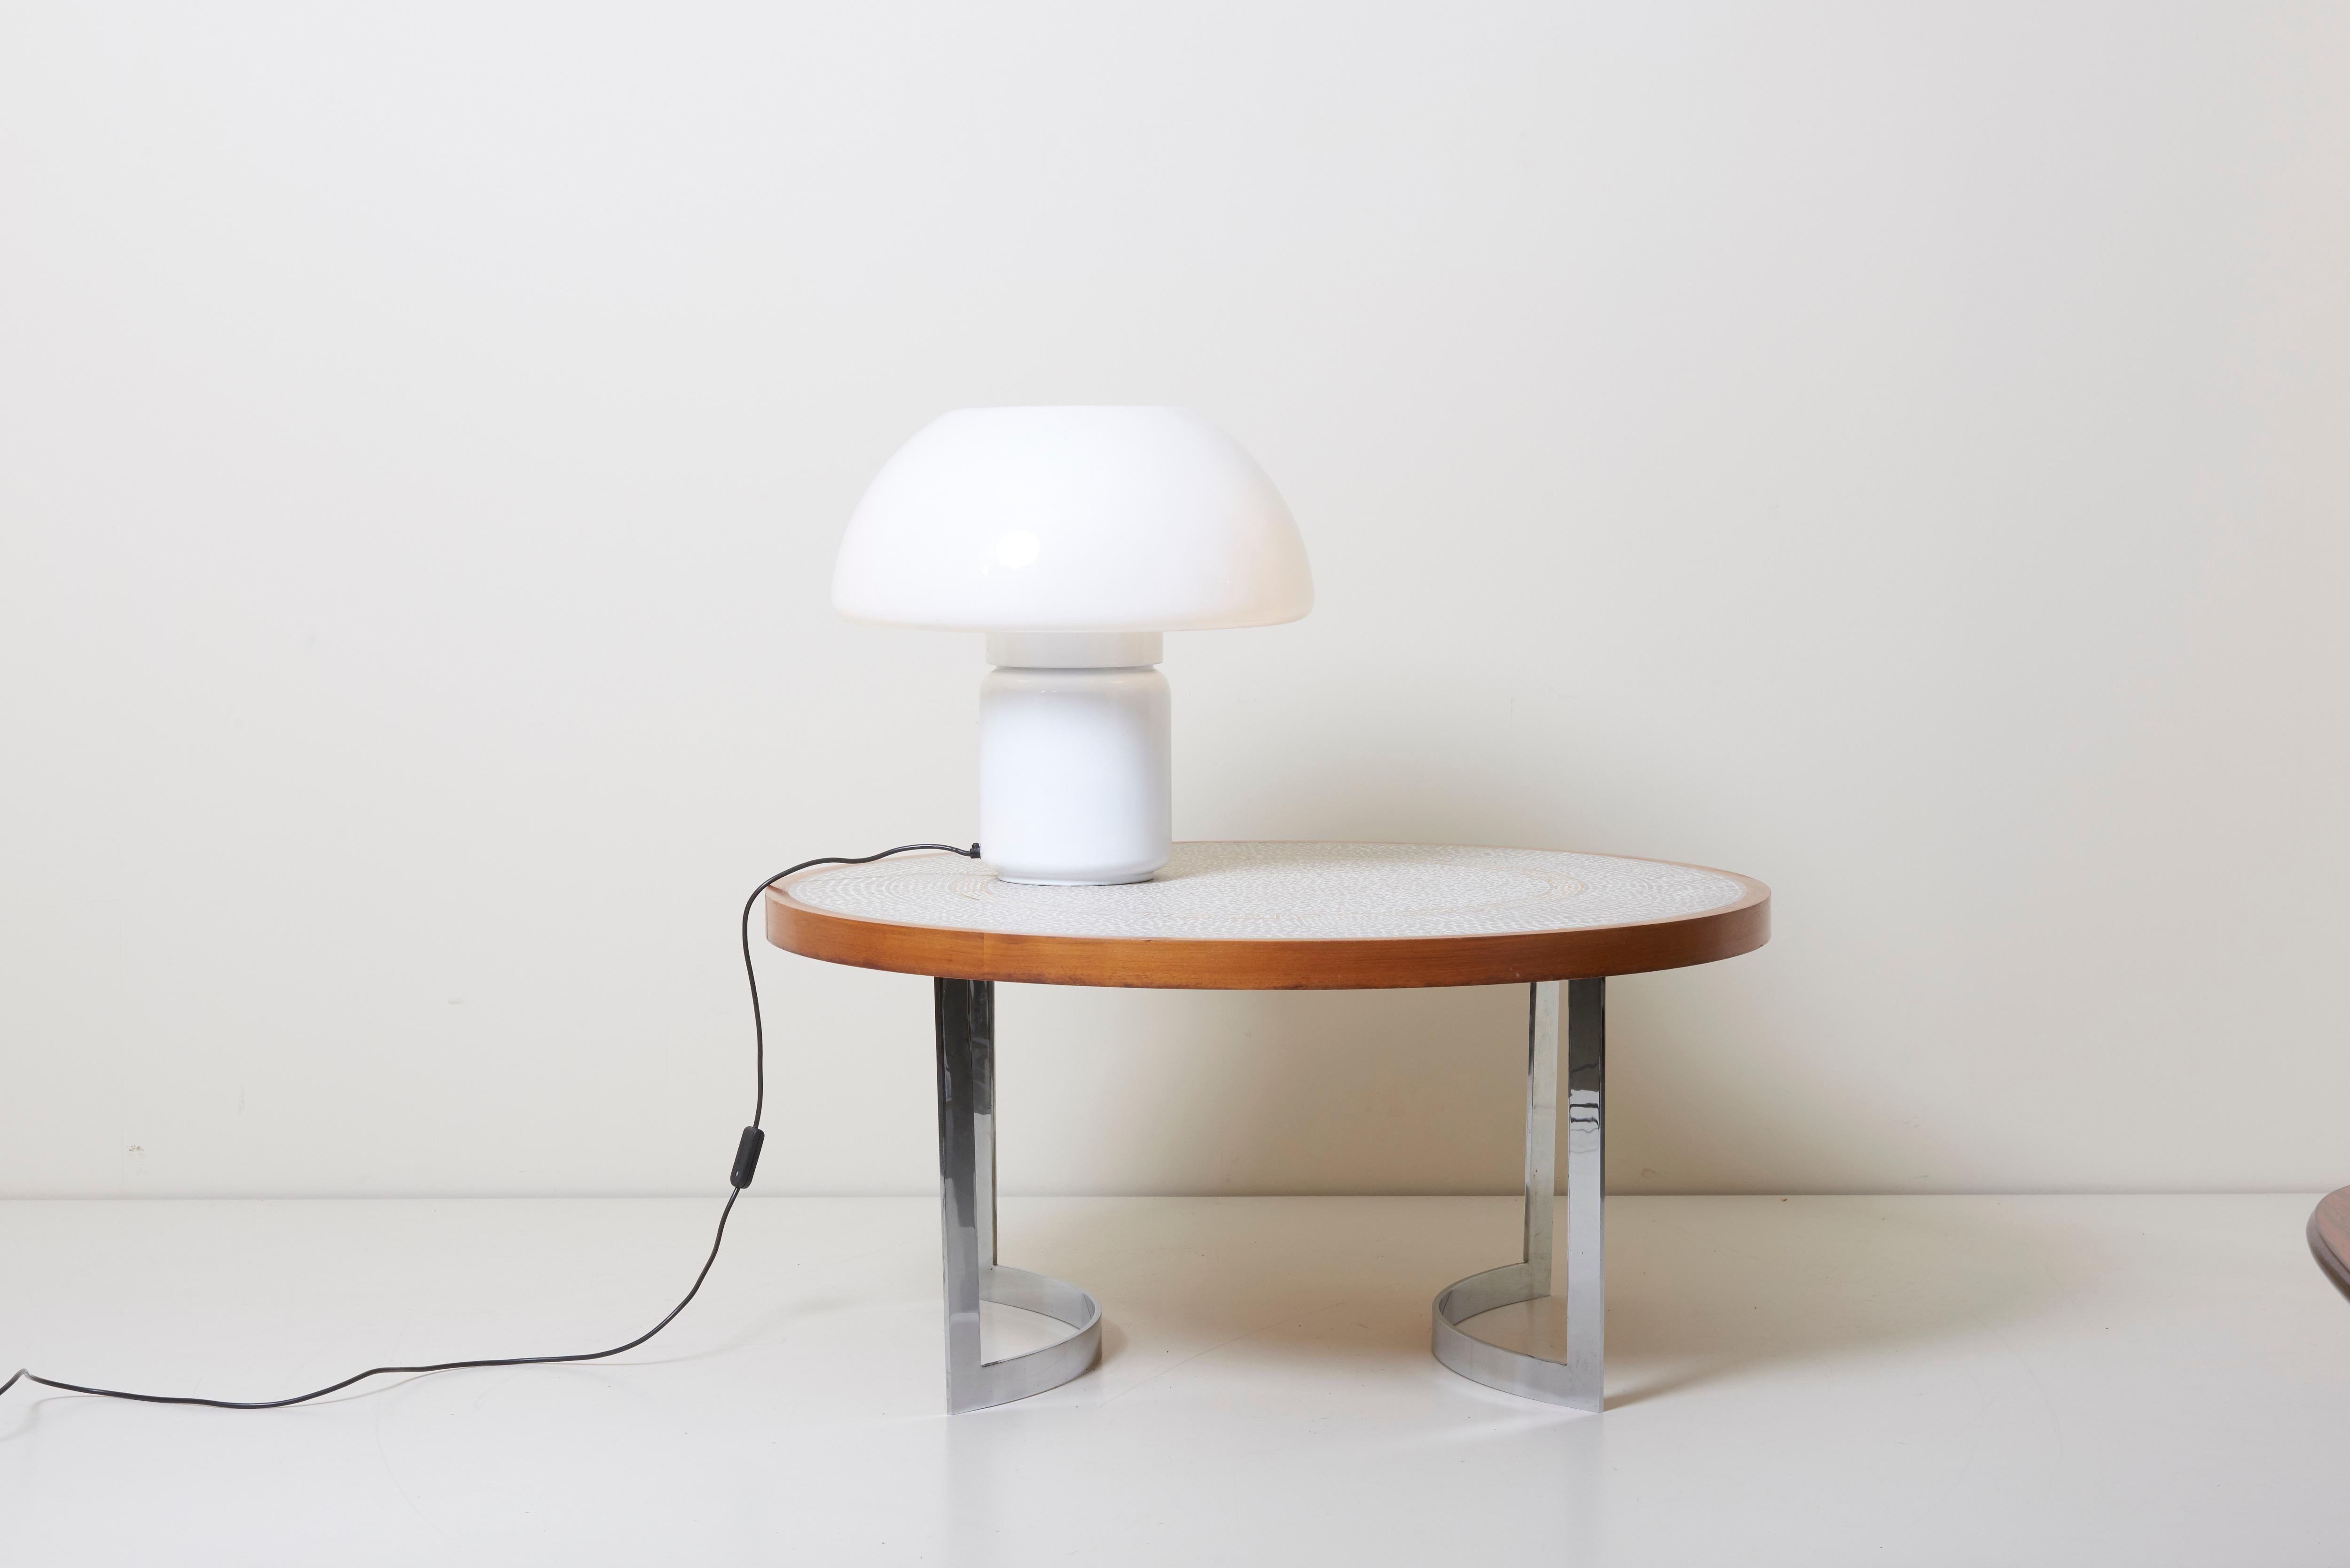 Table Lamp Mod. 625 / Mushroom by Elio Martinelli for Martinelli Luce.
3 x E27 / A bulb.

To be on the safe side, the lamps should be checked locally by a specialist concerning local requirements.